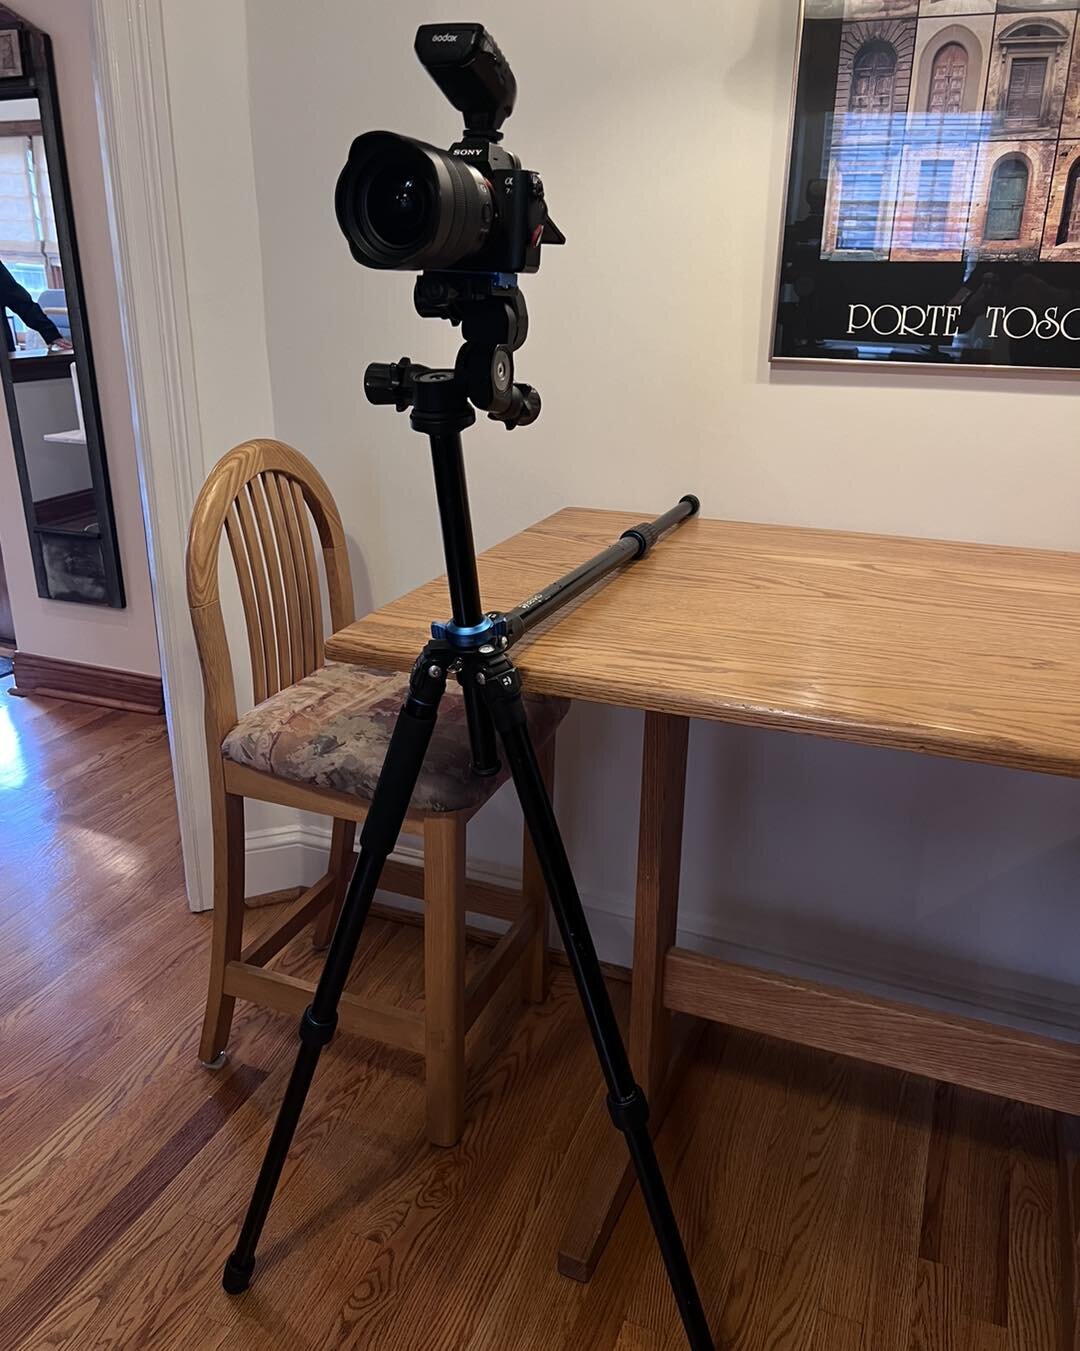 Sometimes you have to get creative to get the right angle. Happy Friday Ya&rsquo;ll! 

www.sfmrealestatemedia.com

#realestatemedia #realestatephotography